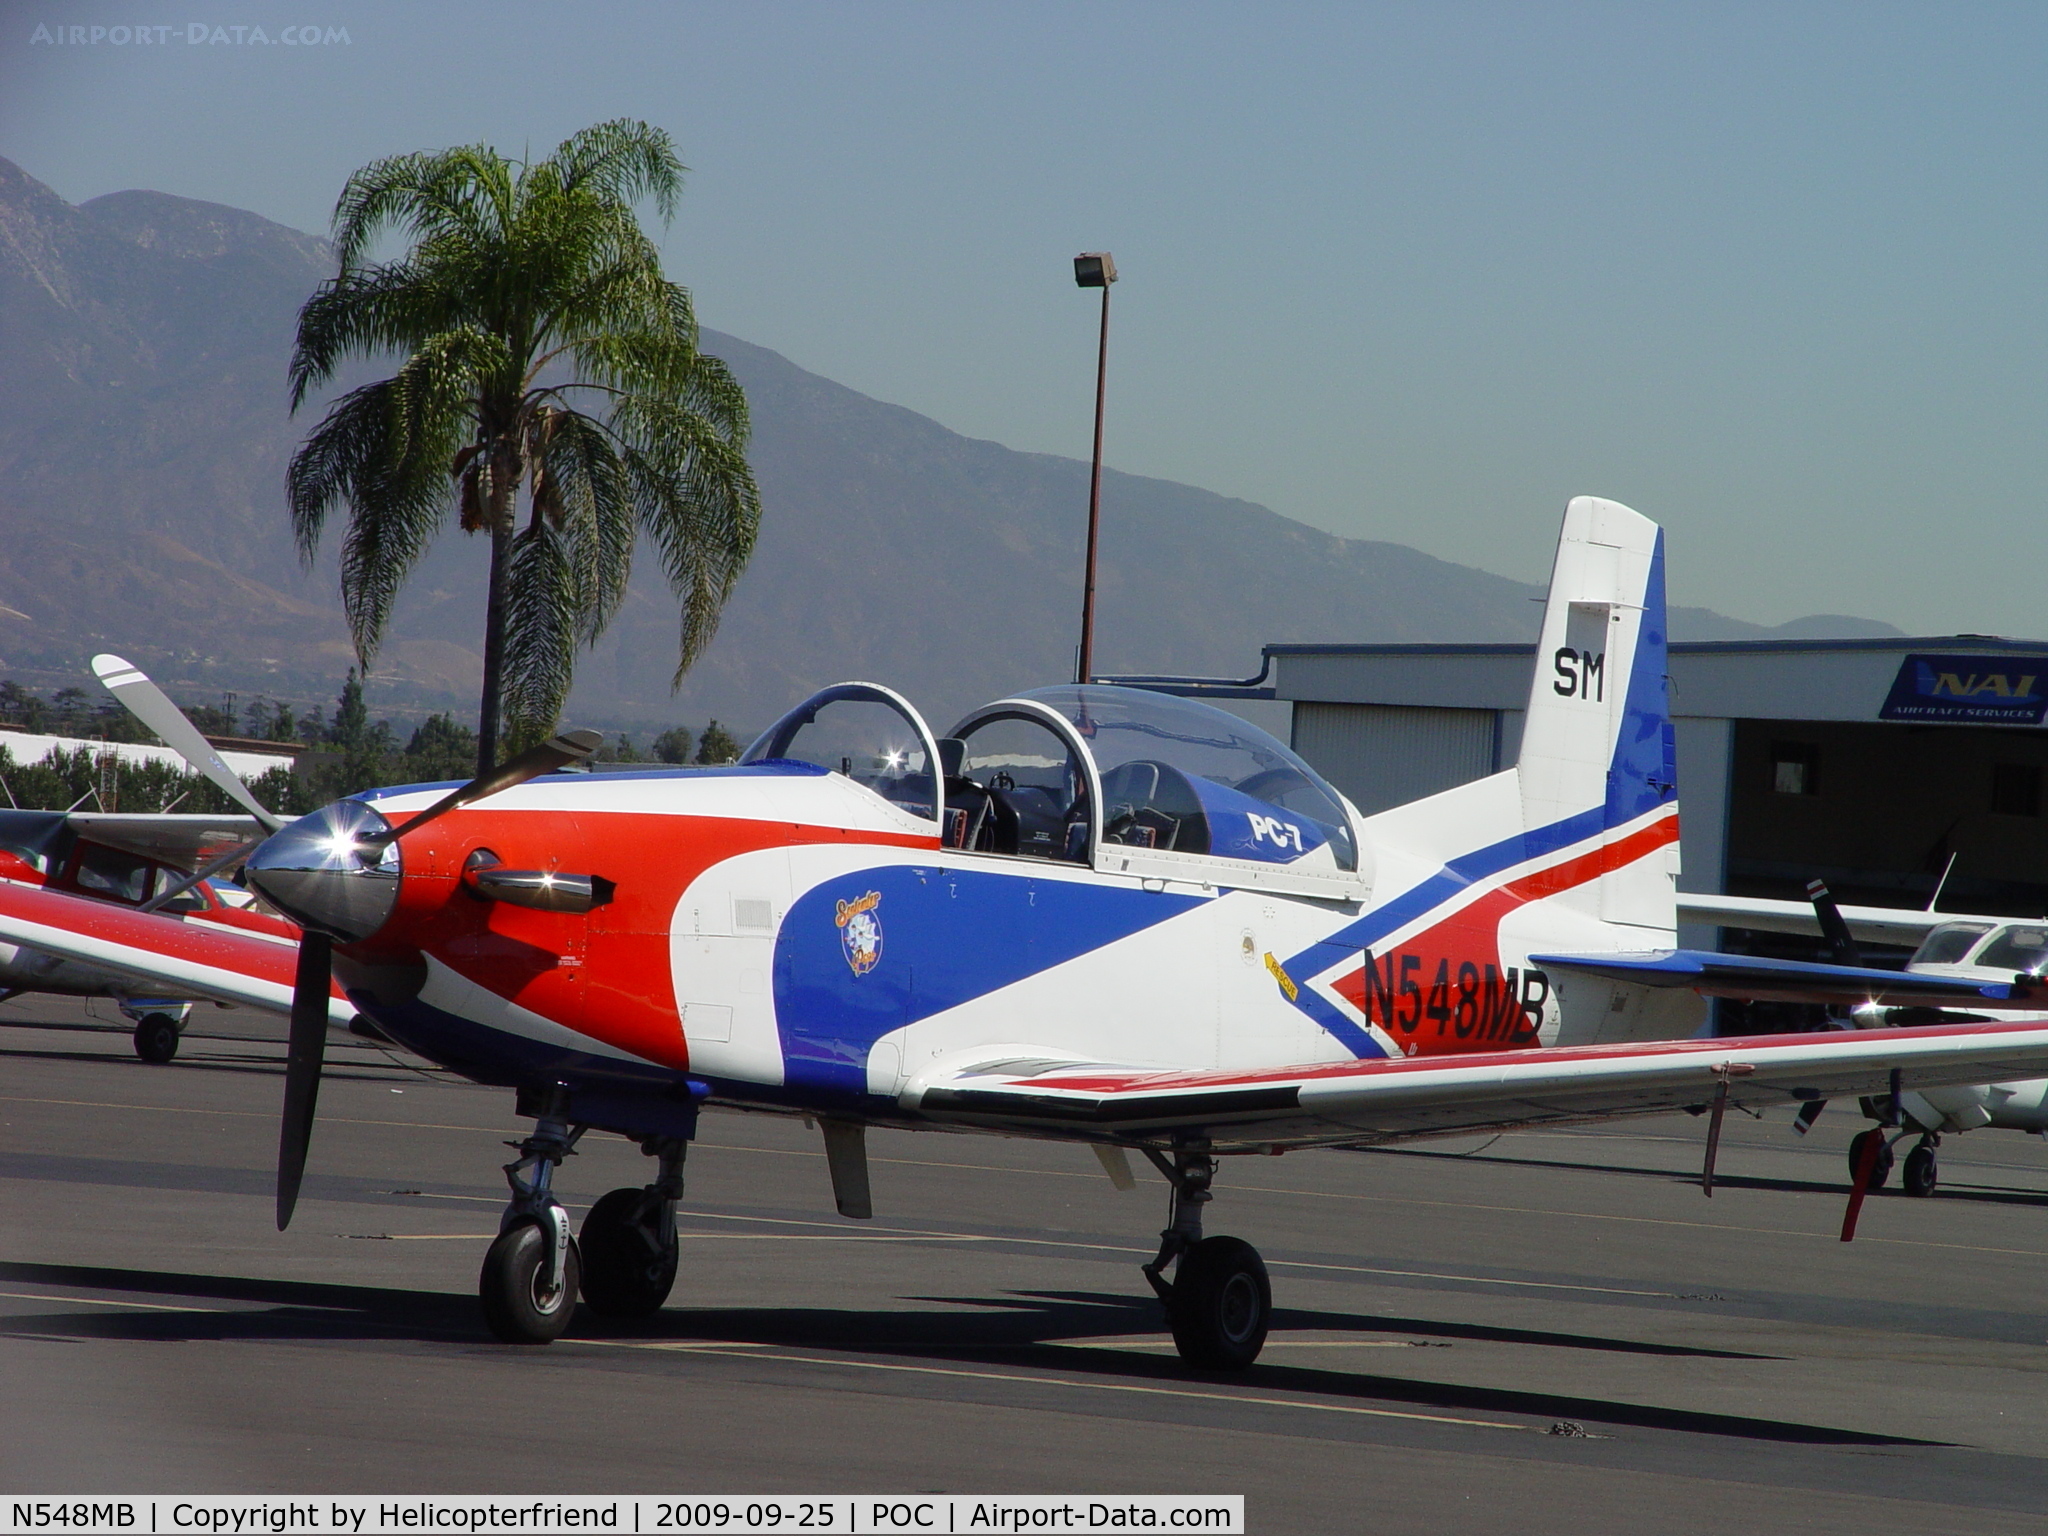 N548MB, 1988 Pilatus PC-7 C/N 548, Waiting for Pilot with canopy open